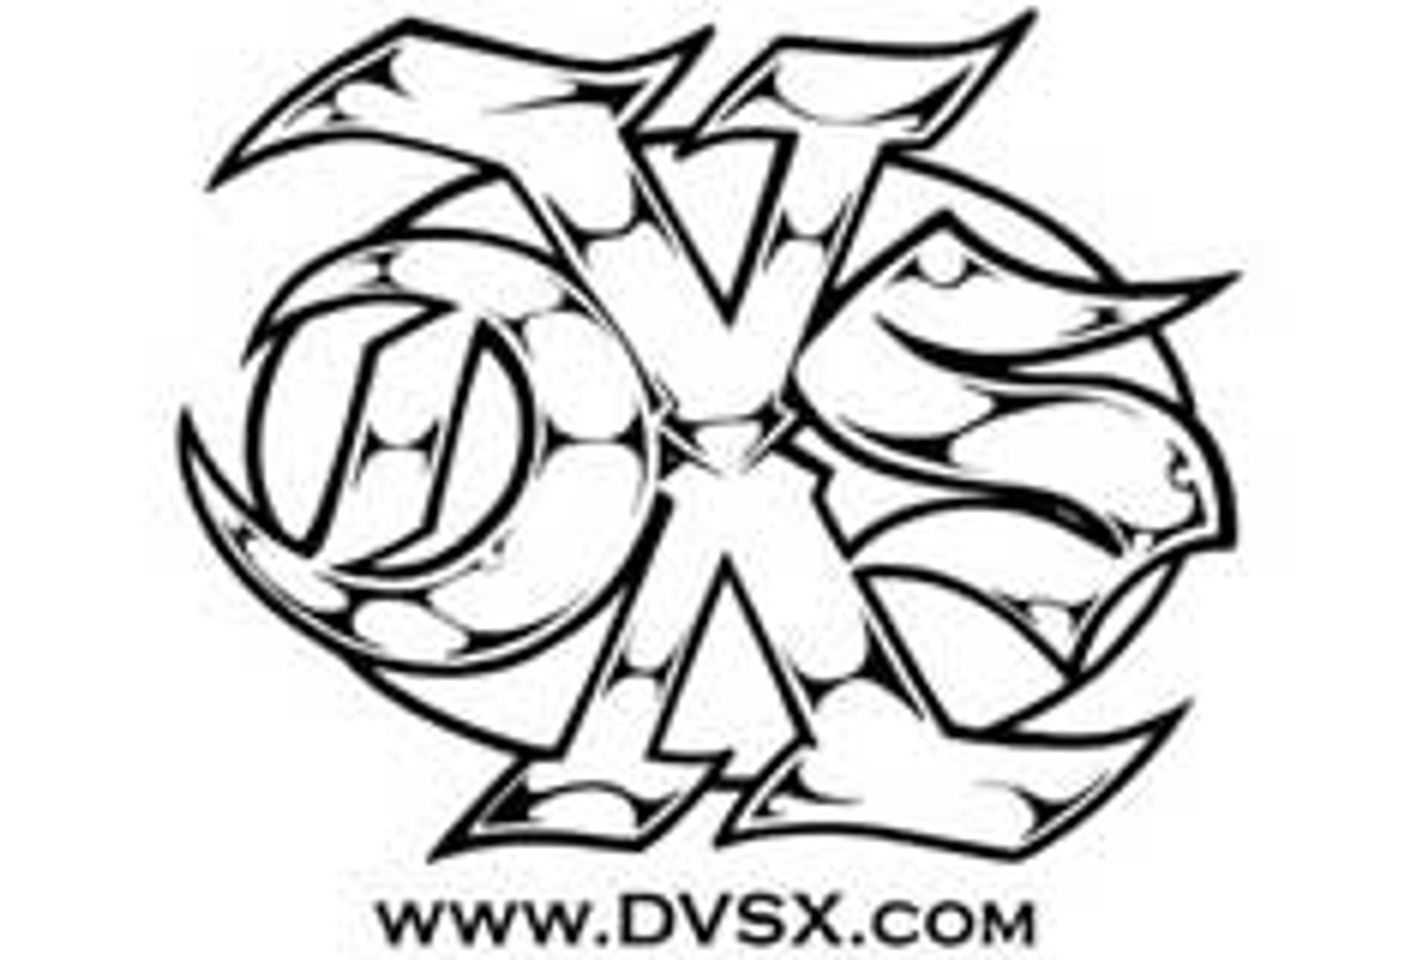 DVSX Names Valerie Tate as New GM